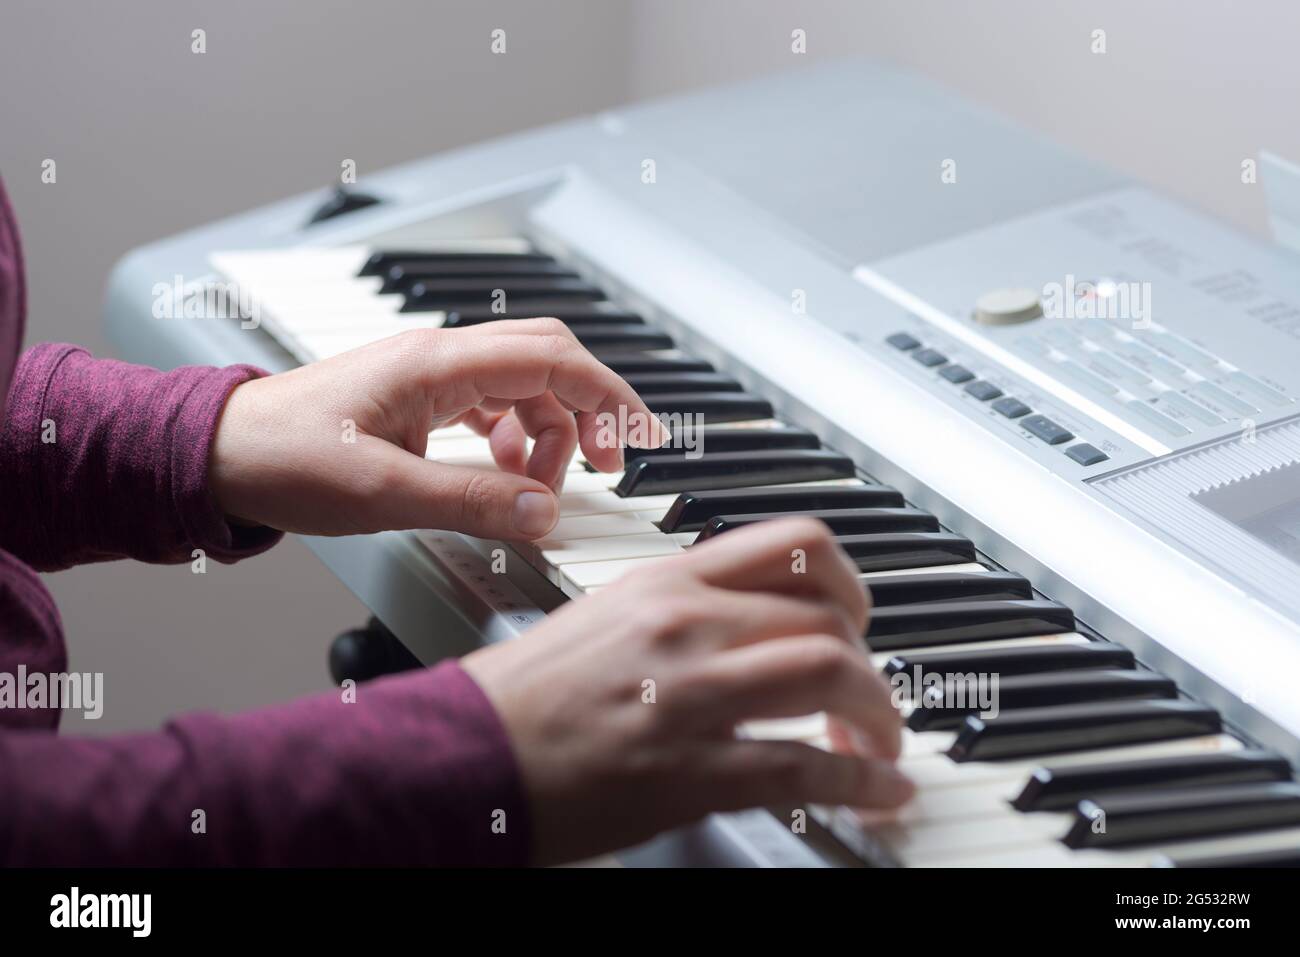 Woman plays keyboard -hands close-up Stock Photo